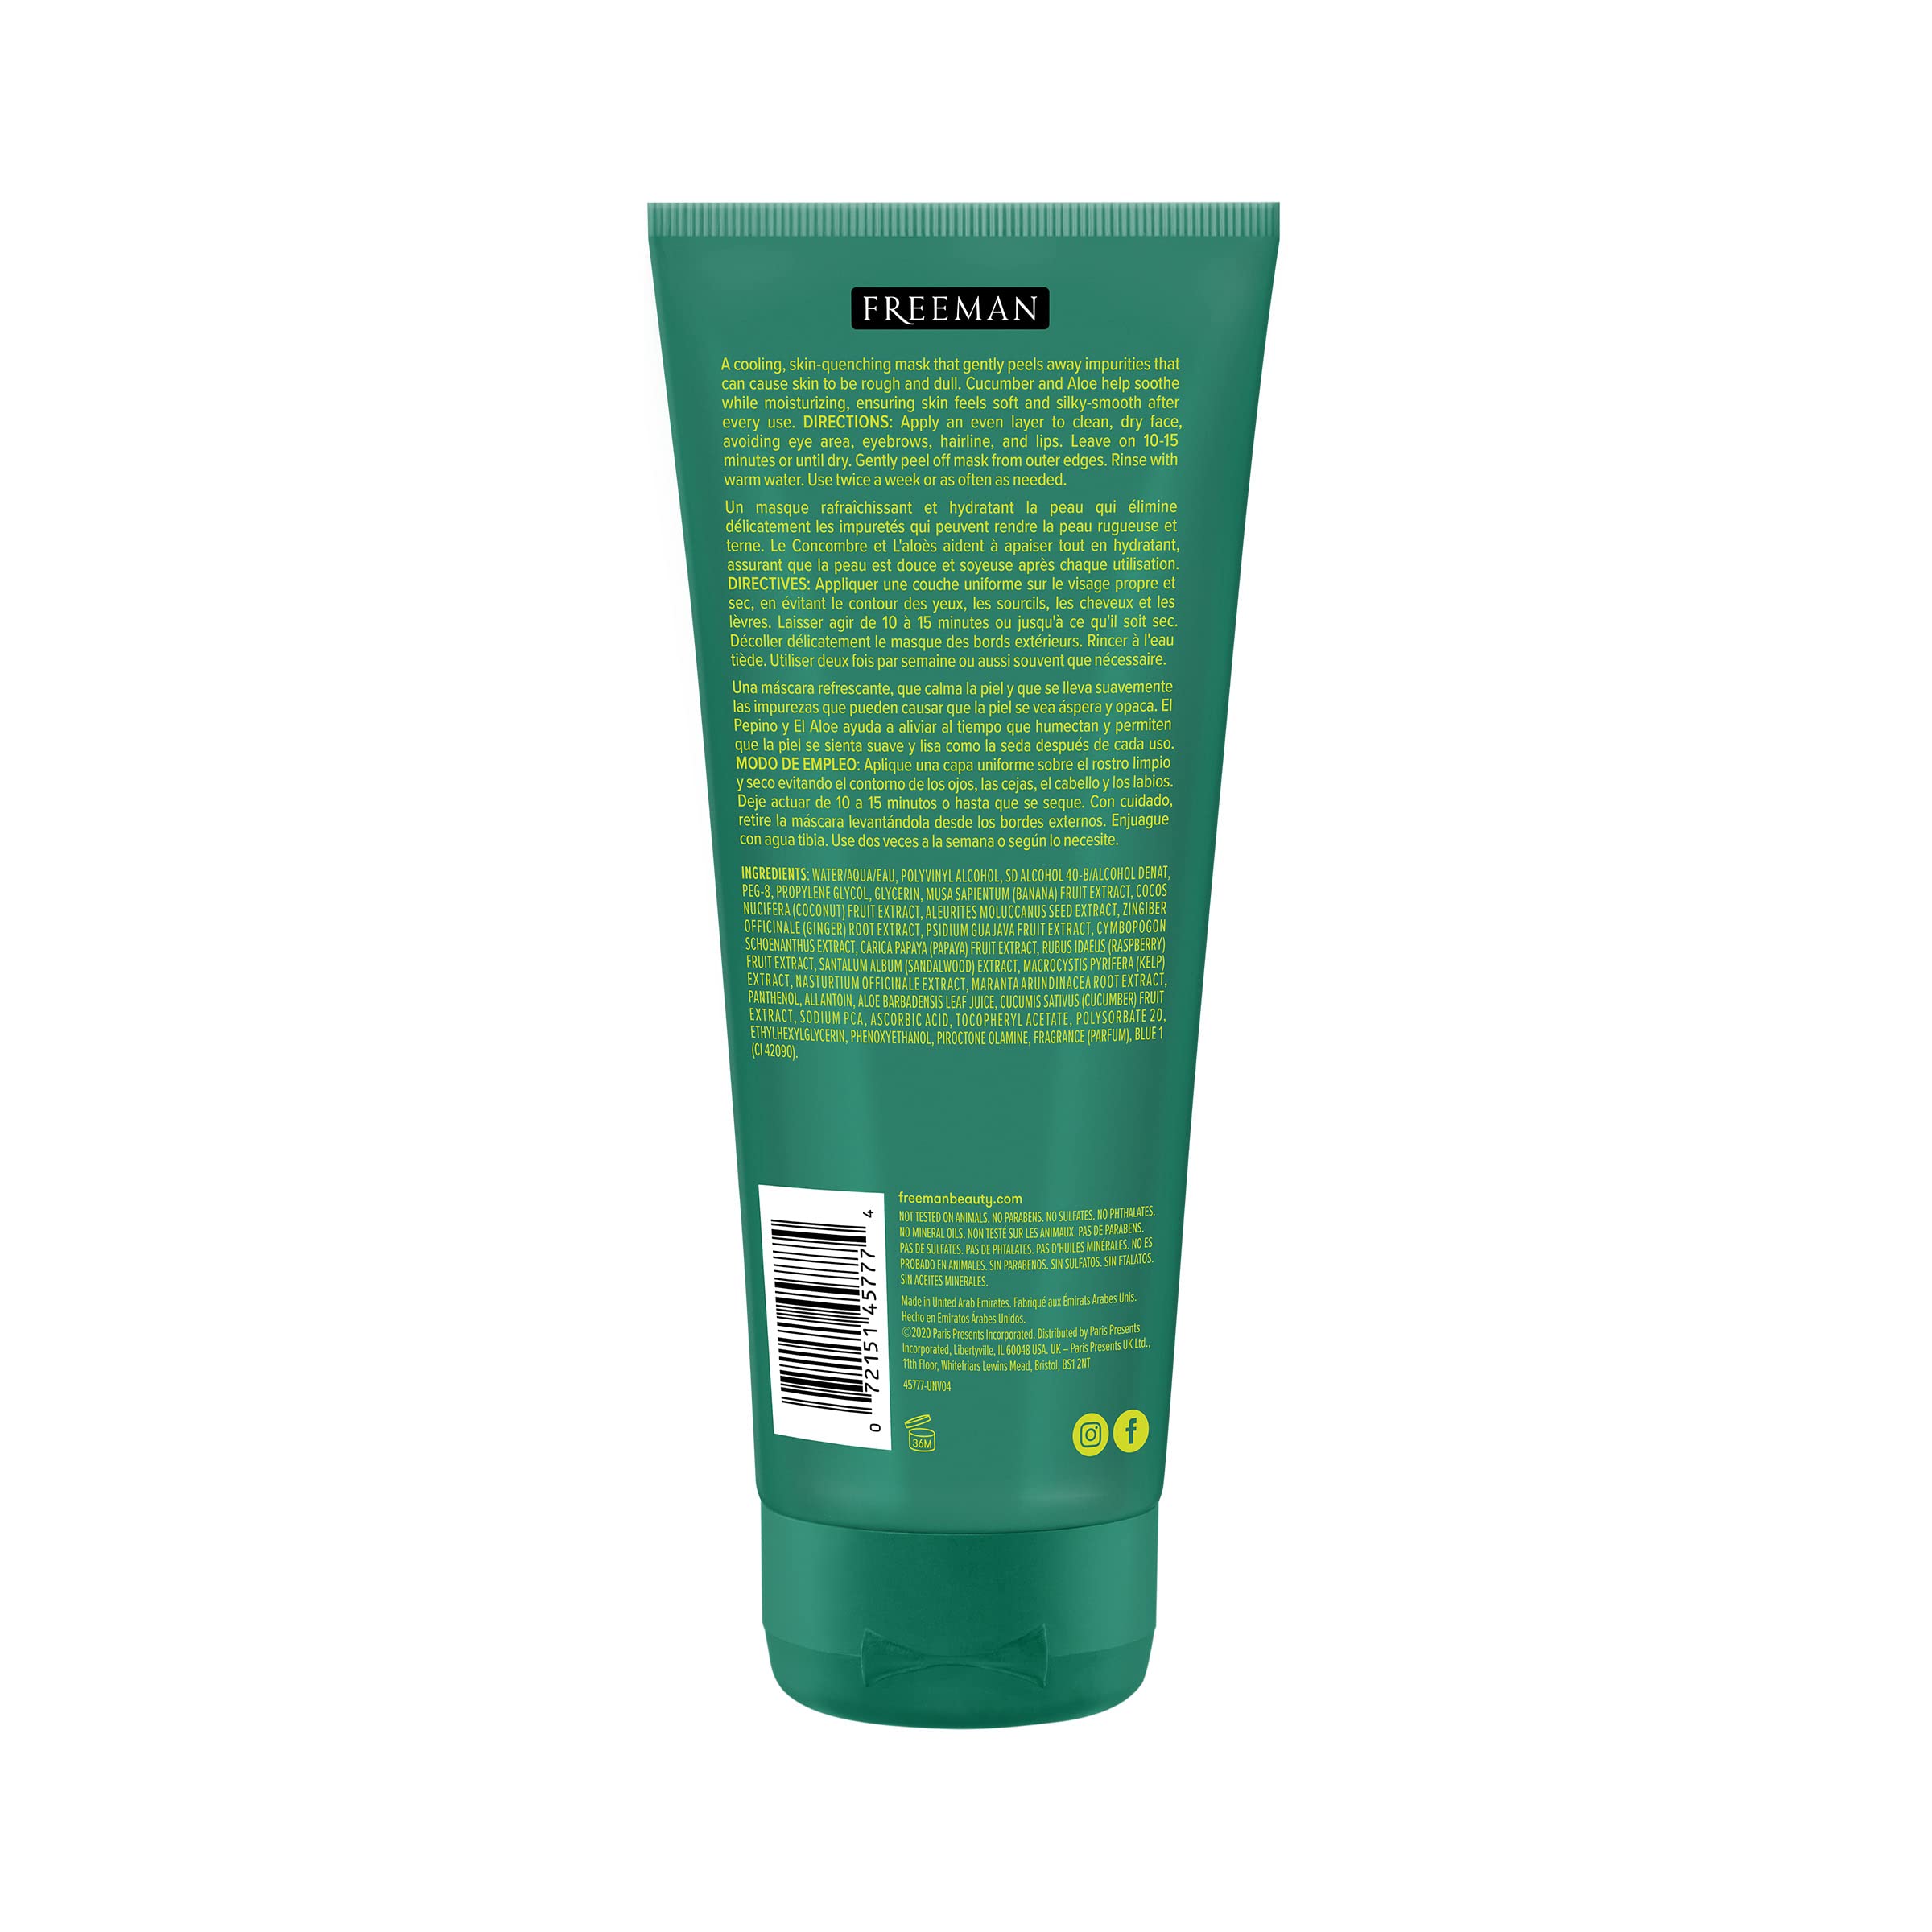 FREEMAN Renewing Cucumber Peel-Off Gel Facial Mask, Face Mask Refreshes Skin, Aloe Soothes & Moisturizes, Get Rejuvenated Skin, For Normal & Combination Skin, 6 fl. oz./175 mL Tube